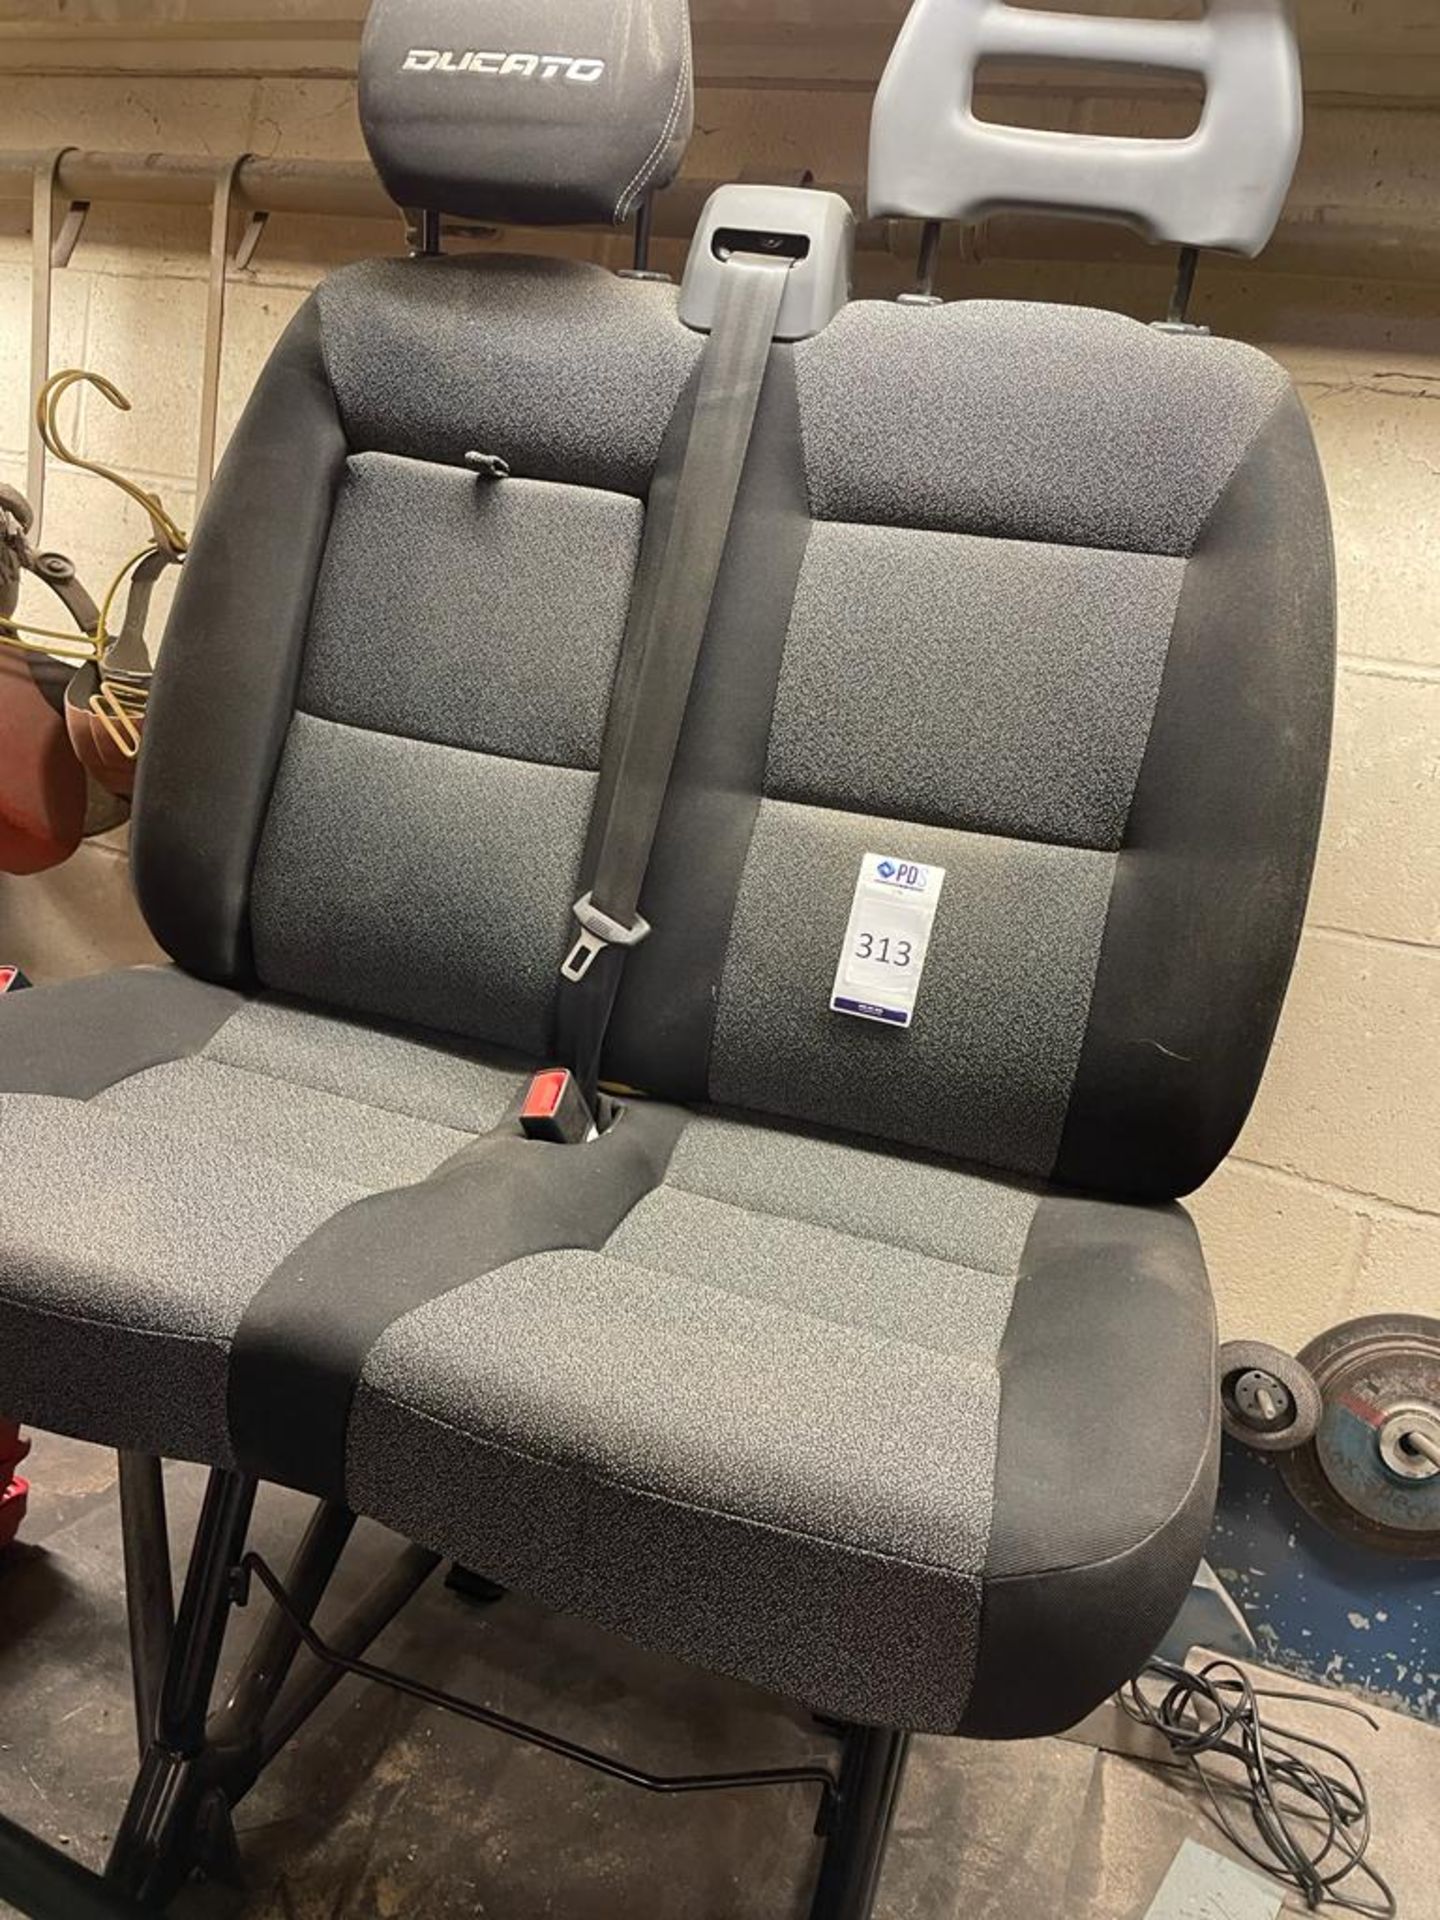 Pair of Fiat Ducato Seats (Location Hythe. Please Refer to General Notes)